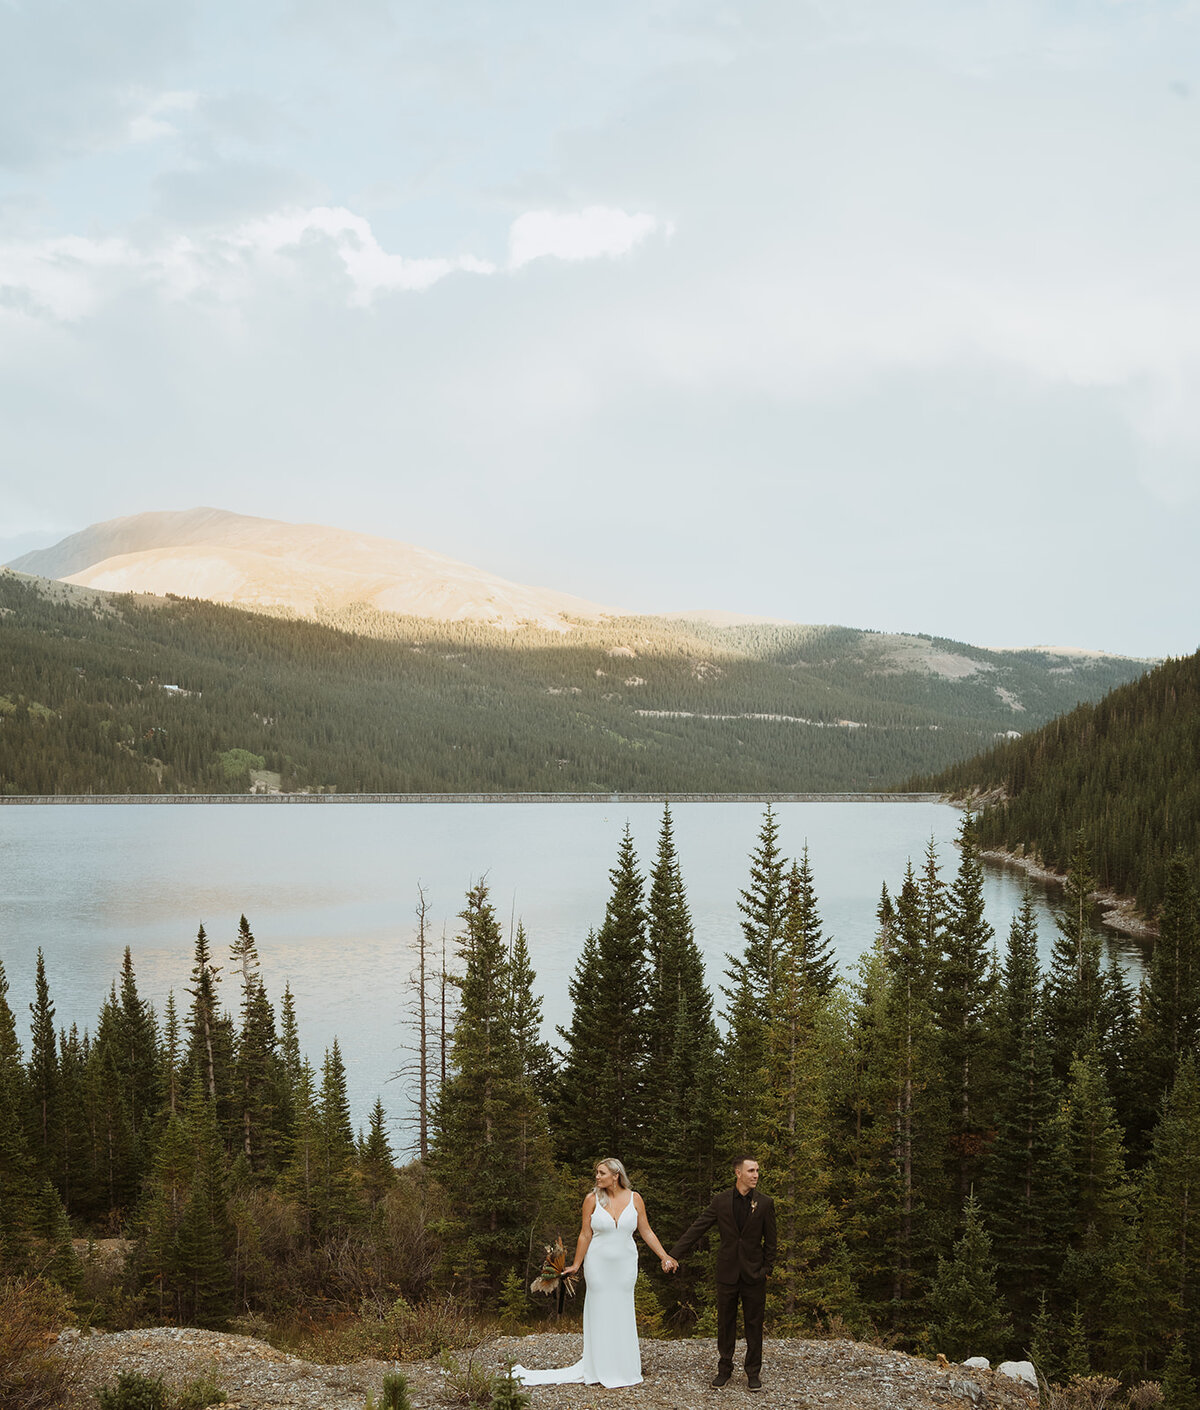 bride and groom are standing on the edge of the cliff kissing while the bride has her bouquet in the air with a large lake and pine trees in the background.